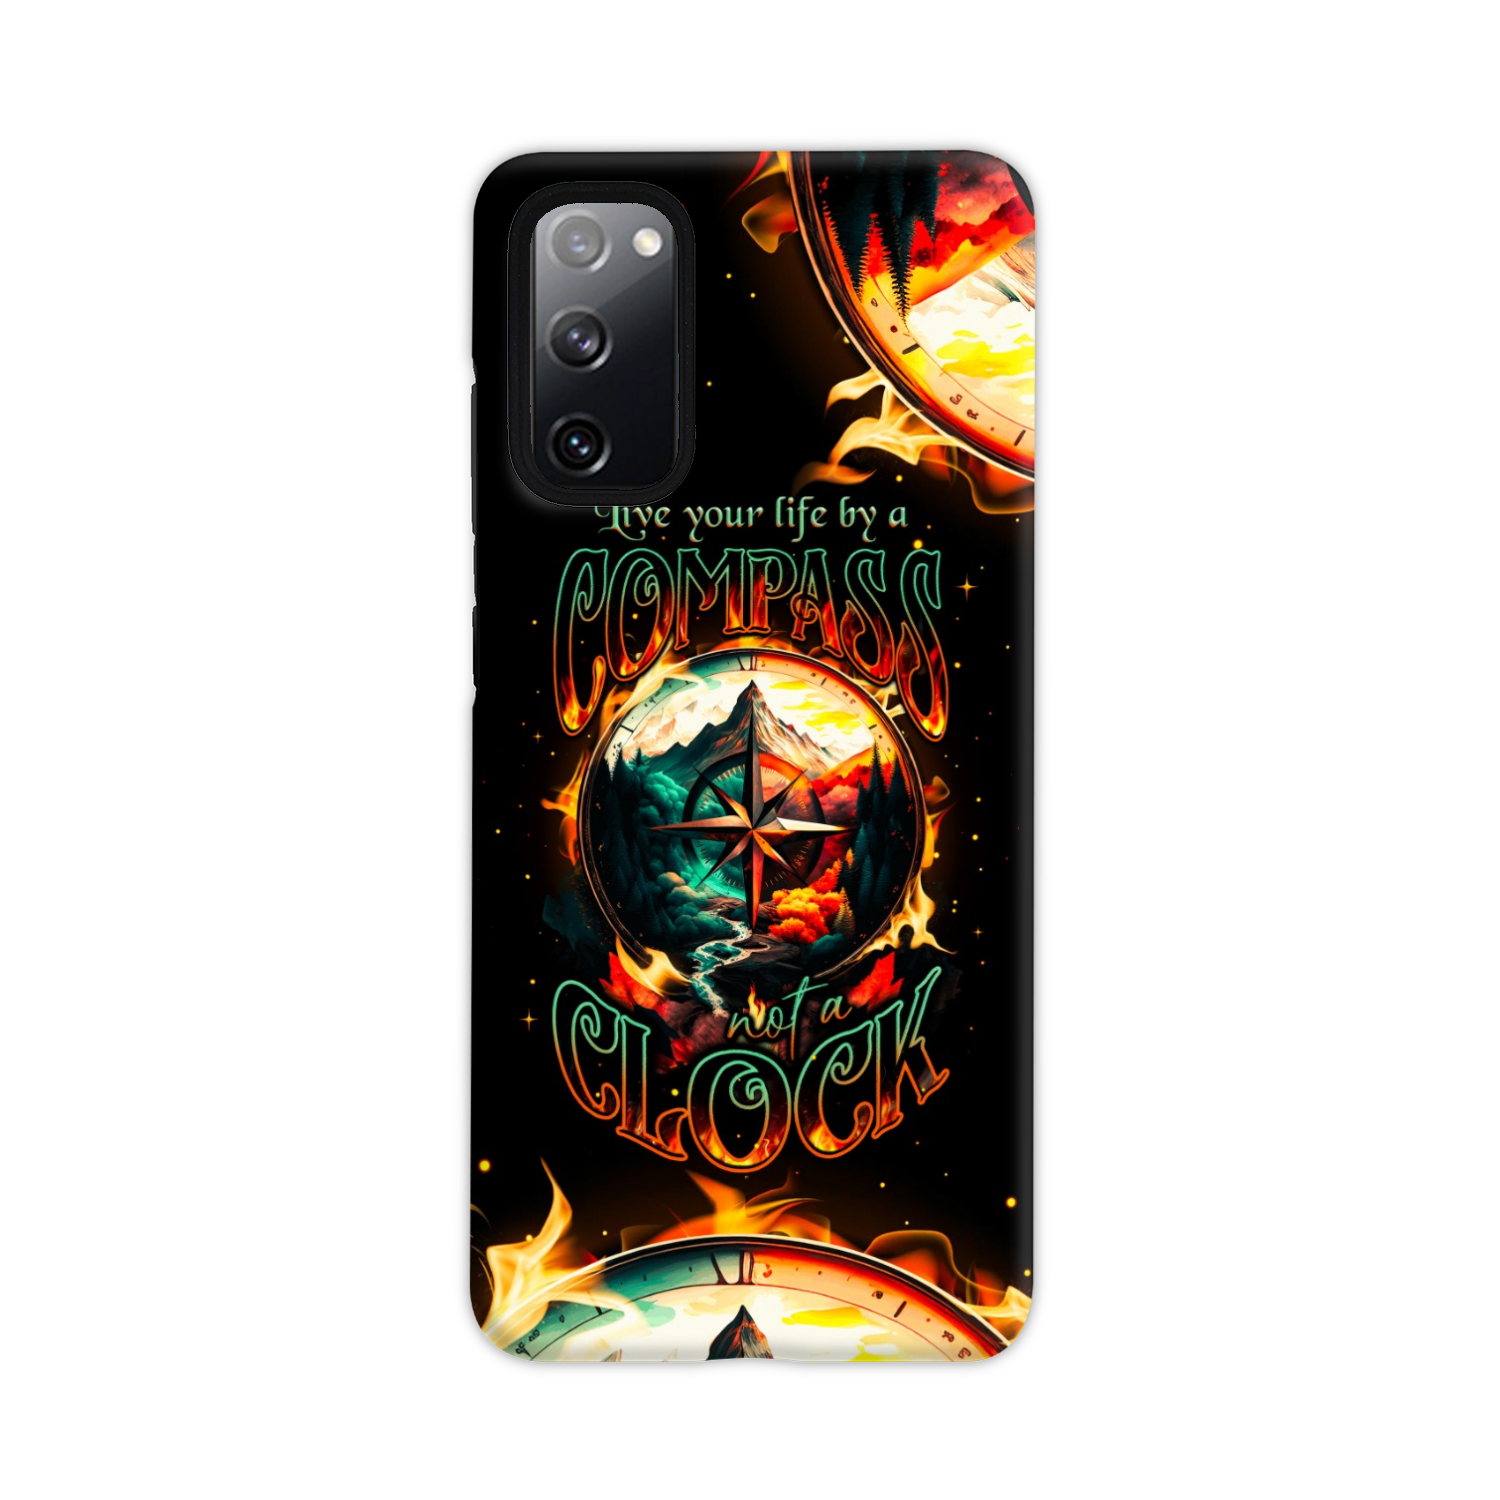 LIVE YOUR LIFE BY A COMPASS PHONE CASE - TY2804234